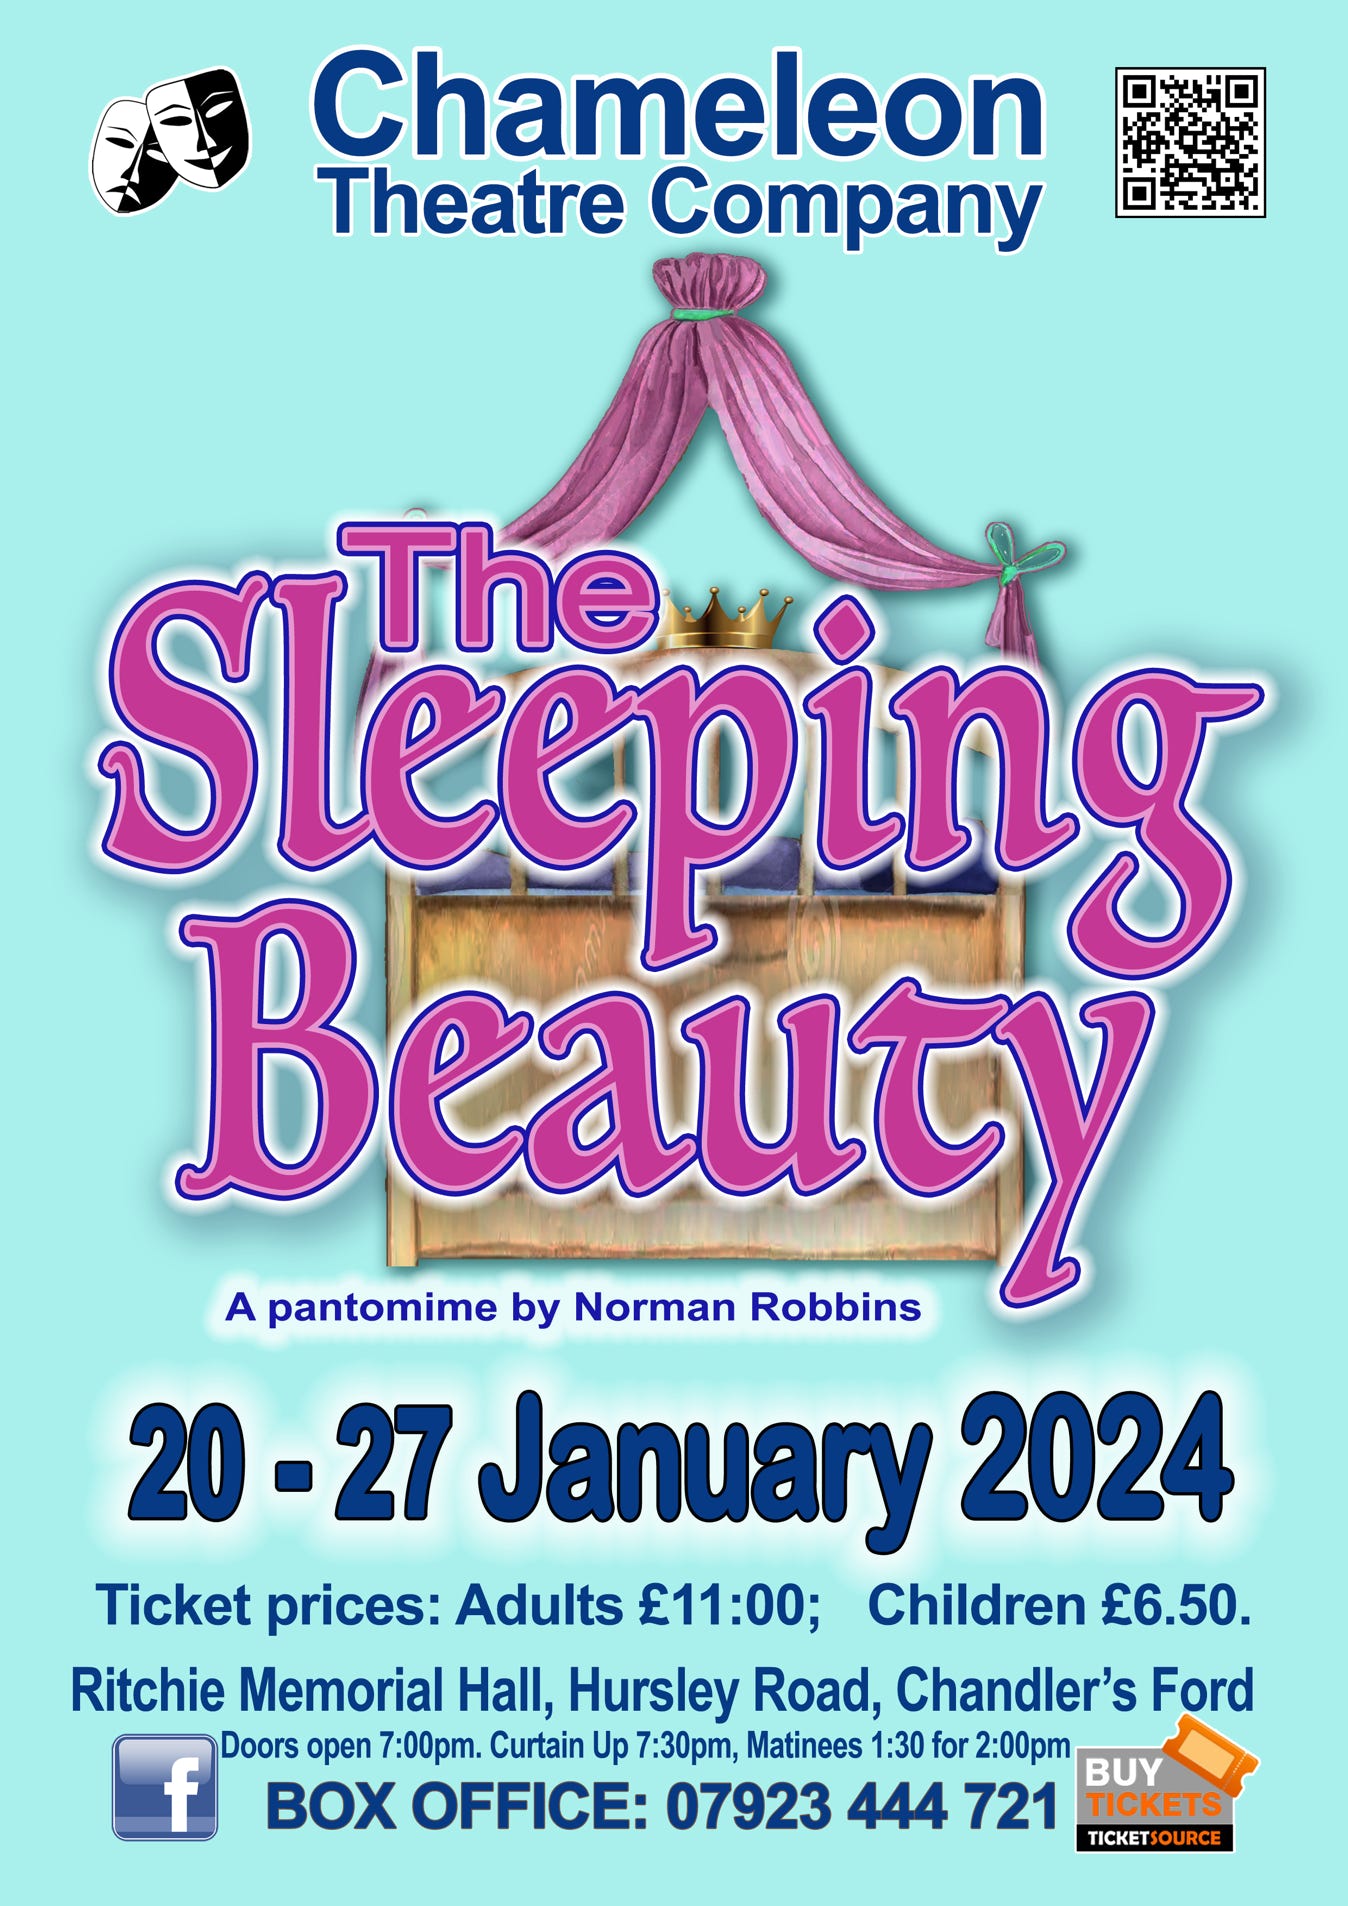 We are delighted to be sponsoring the Chameleon Theatre Company